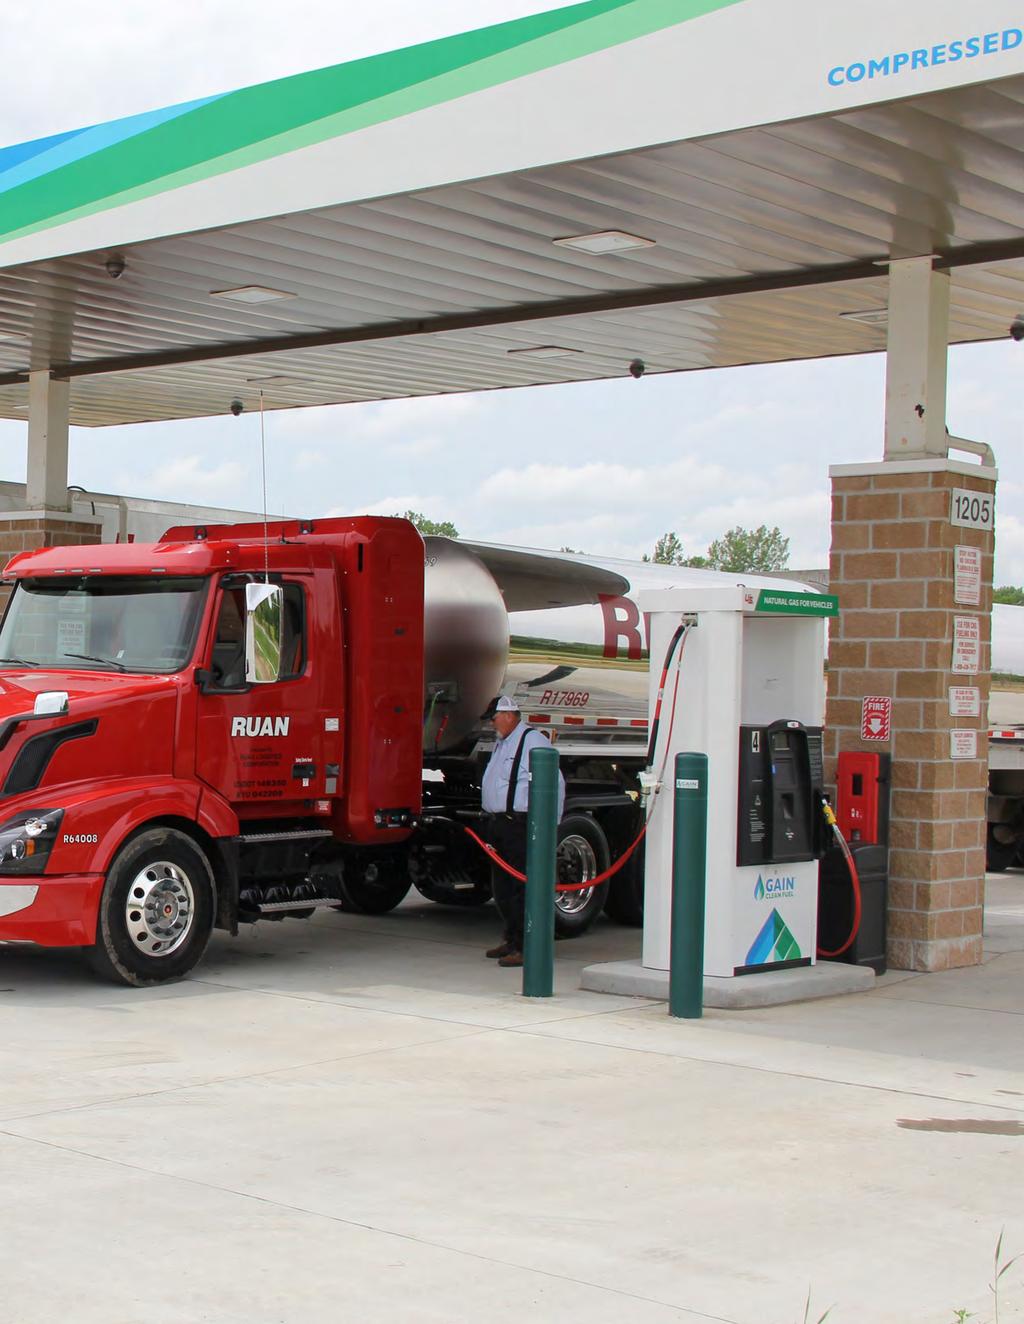 Biomass Innovation - Ruan Transportation Management Systems Ruan, an Iowa-based transportation provider, has extensively invested in fuel-efficient vehicle deployment, operating CNG and RNG-powered